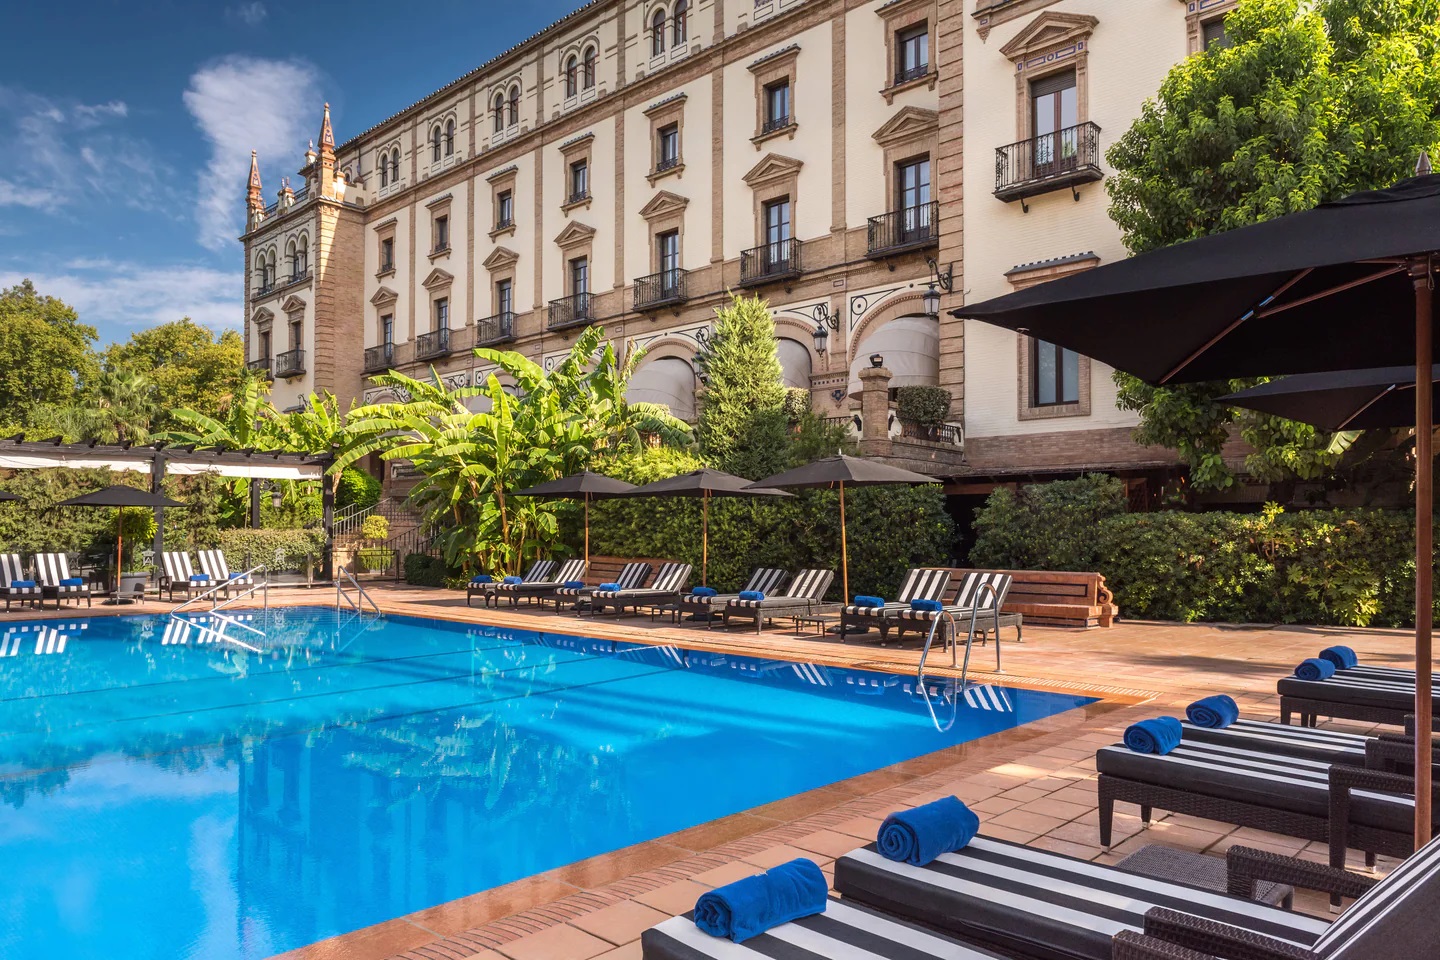 The outdoor swimming pool at Hotel Alfonso XIII Seville